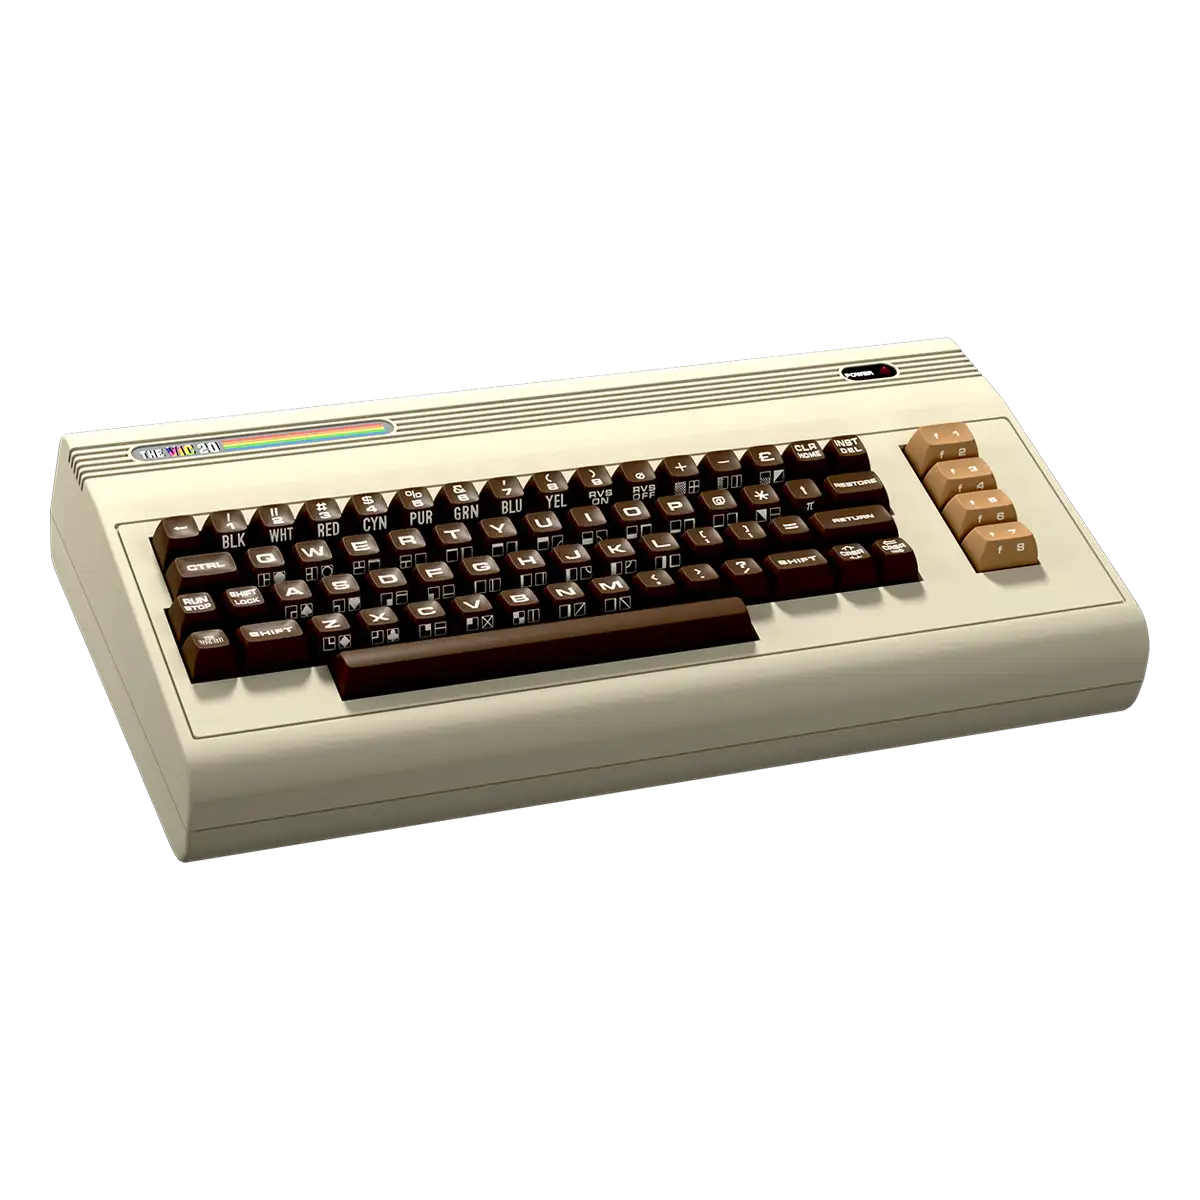 THE VIC 20 - Limited Edition C64 Image 2